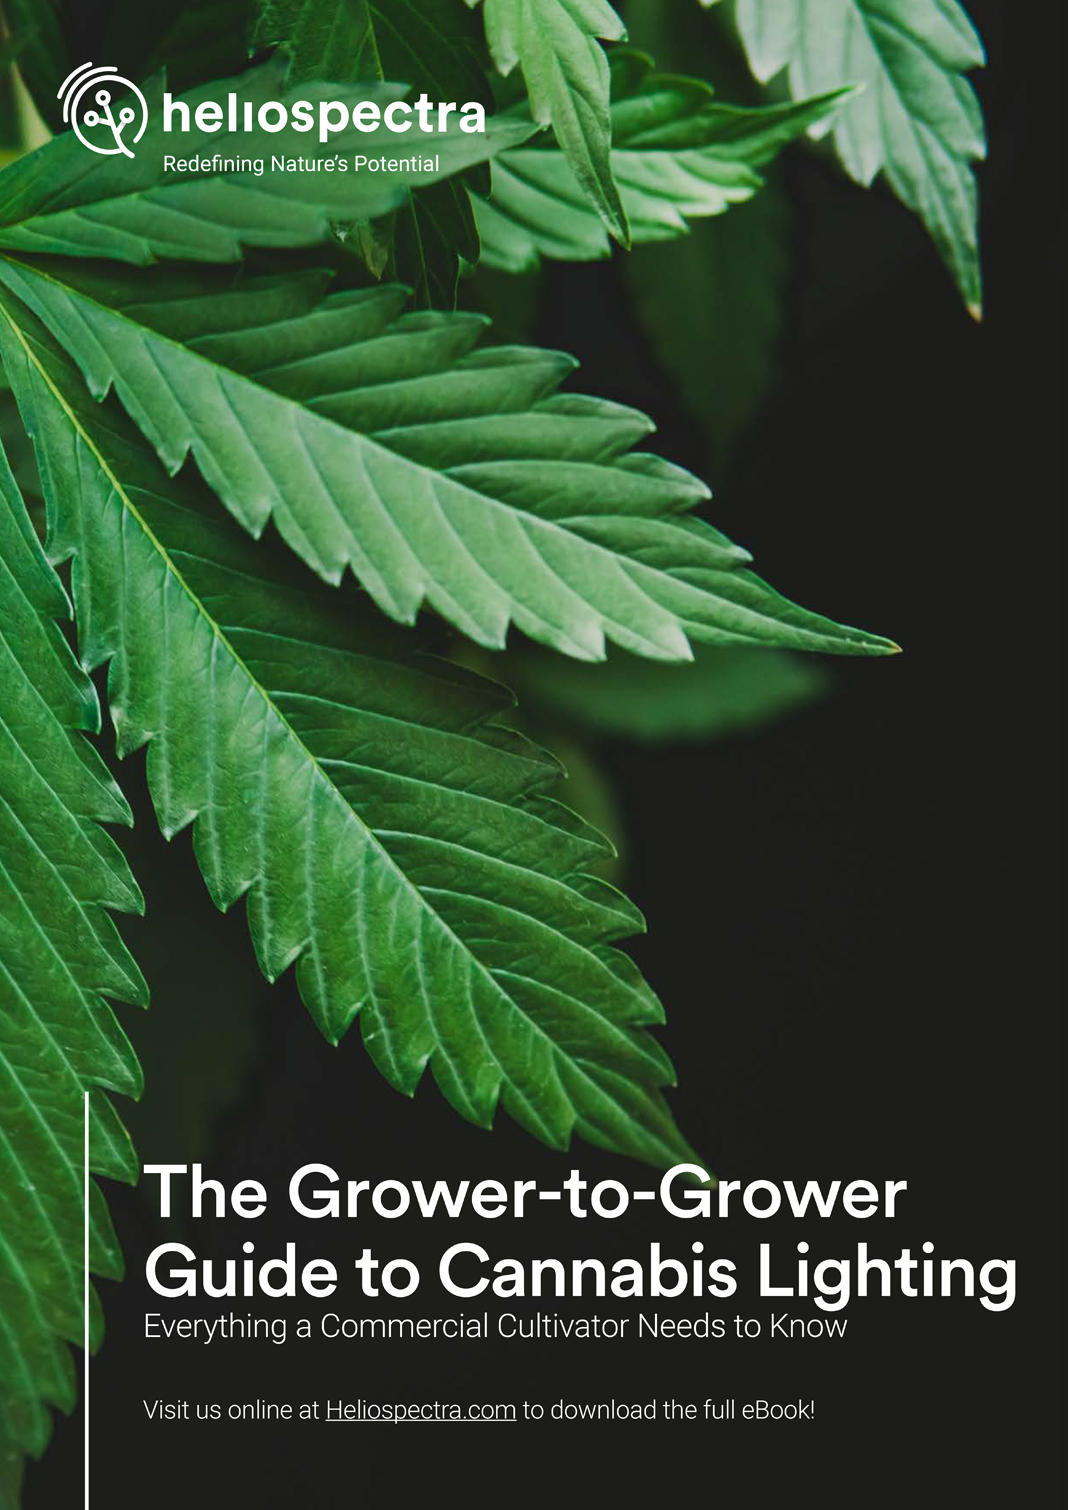 Everything a commercial cannabis grower needs to know about lighting